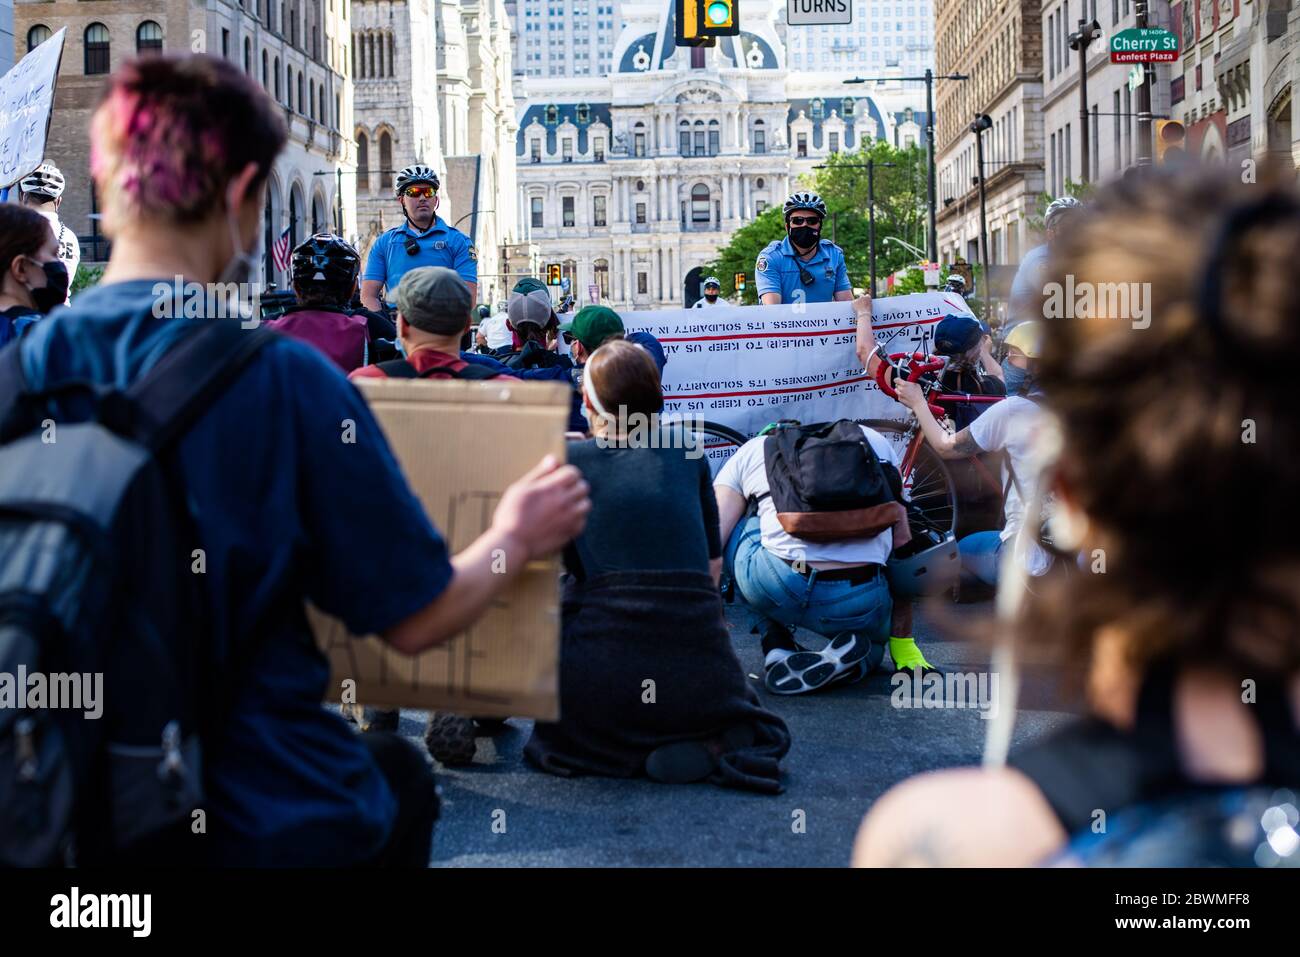 Philadelphia, Pennsylvania / USA. Protesters kneel in front of bike-mounted police. The reason was unclear, but after a line of police vehicles made a U-turn on Broad street back towards city hall the bike police dispersed. The crowd focused on the officer on the left for not wearing a face mask, calling him out for increasing health risks during the coronavirus pandemic. June 01, 2020. Credit: Christopher Evens/Alamy Live News Stock Photo